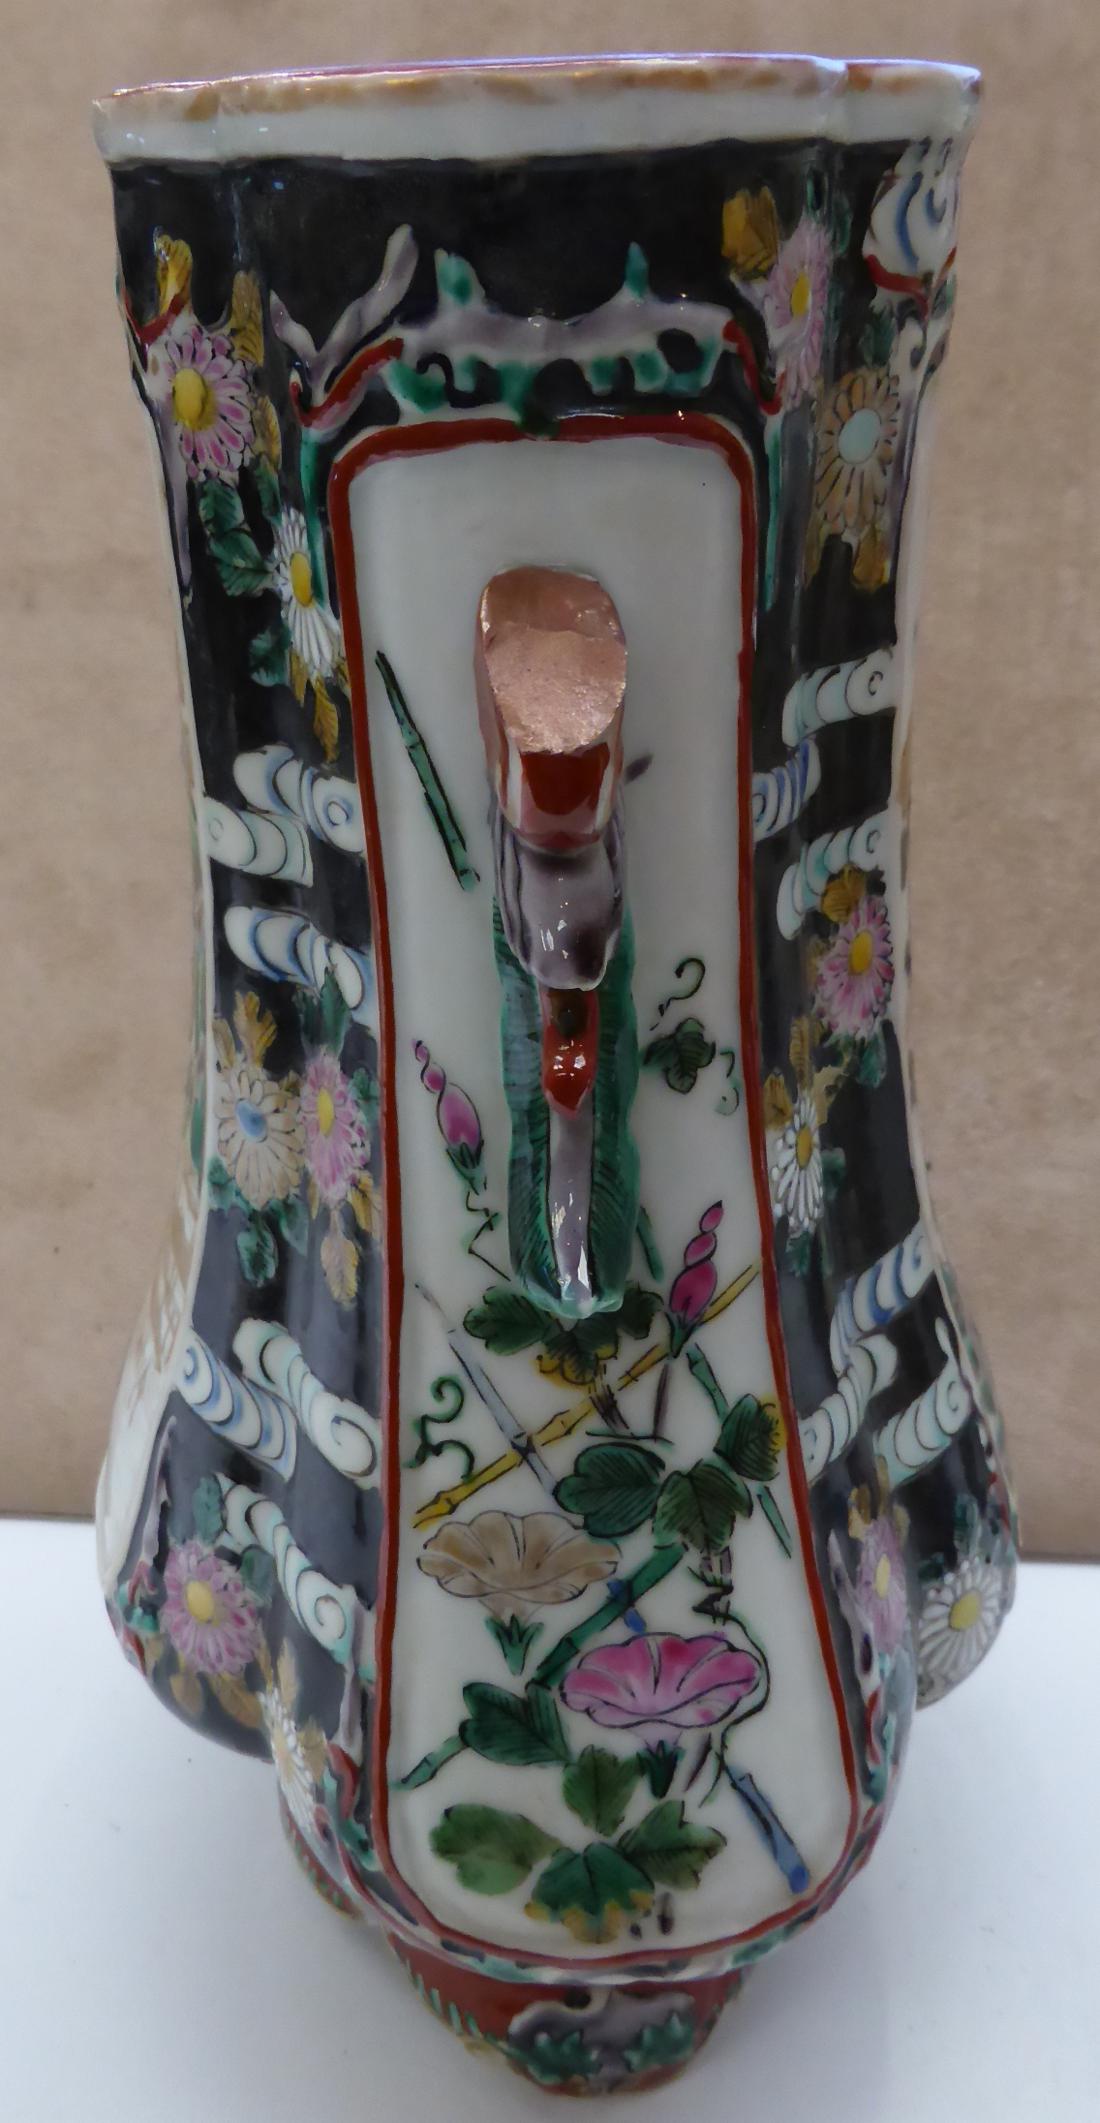 A Chinese famille vert/noir vase on wood stand - Image 3 of 7